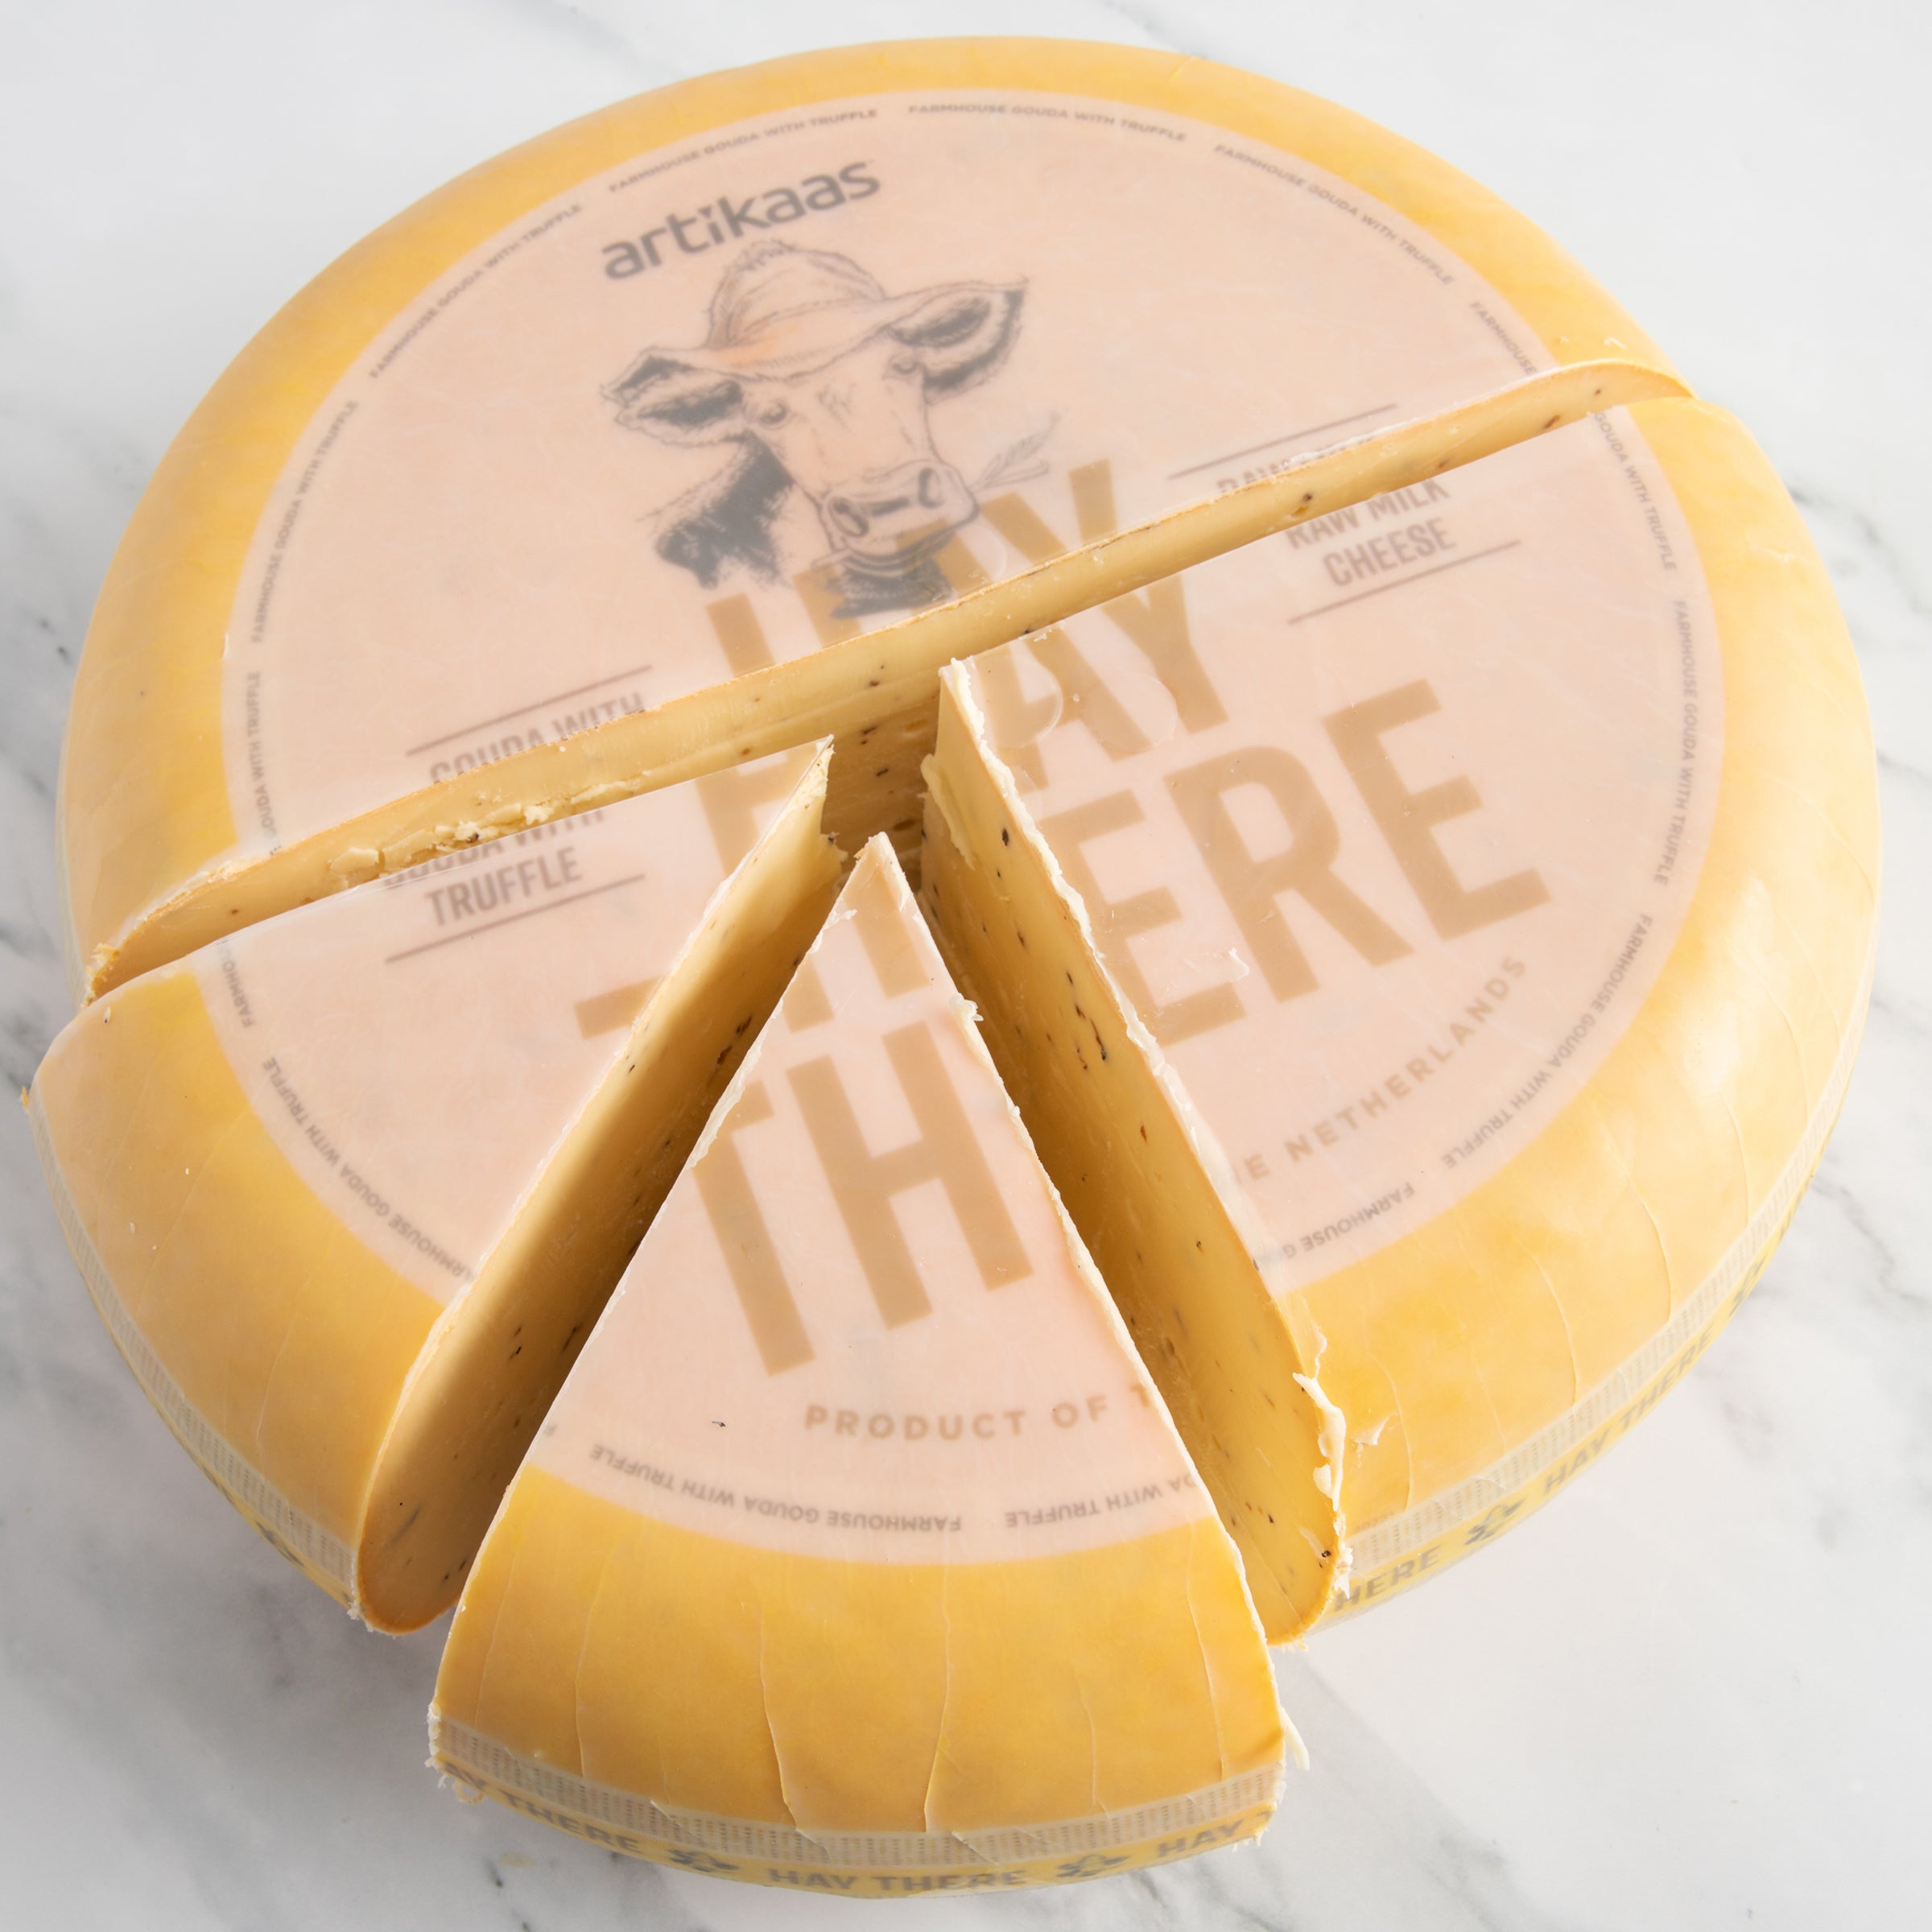 Artikaas Hay There Gouda Cheese with Truffles_Cut & Wrapped by igourmet_Cheese